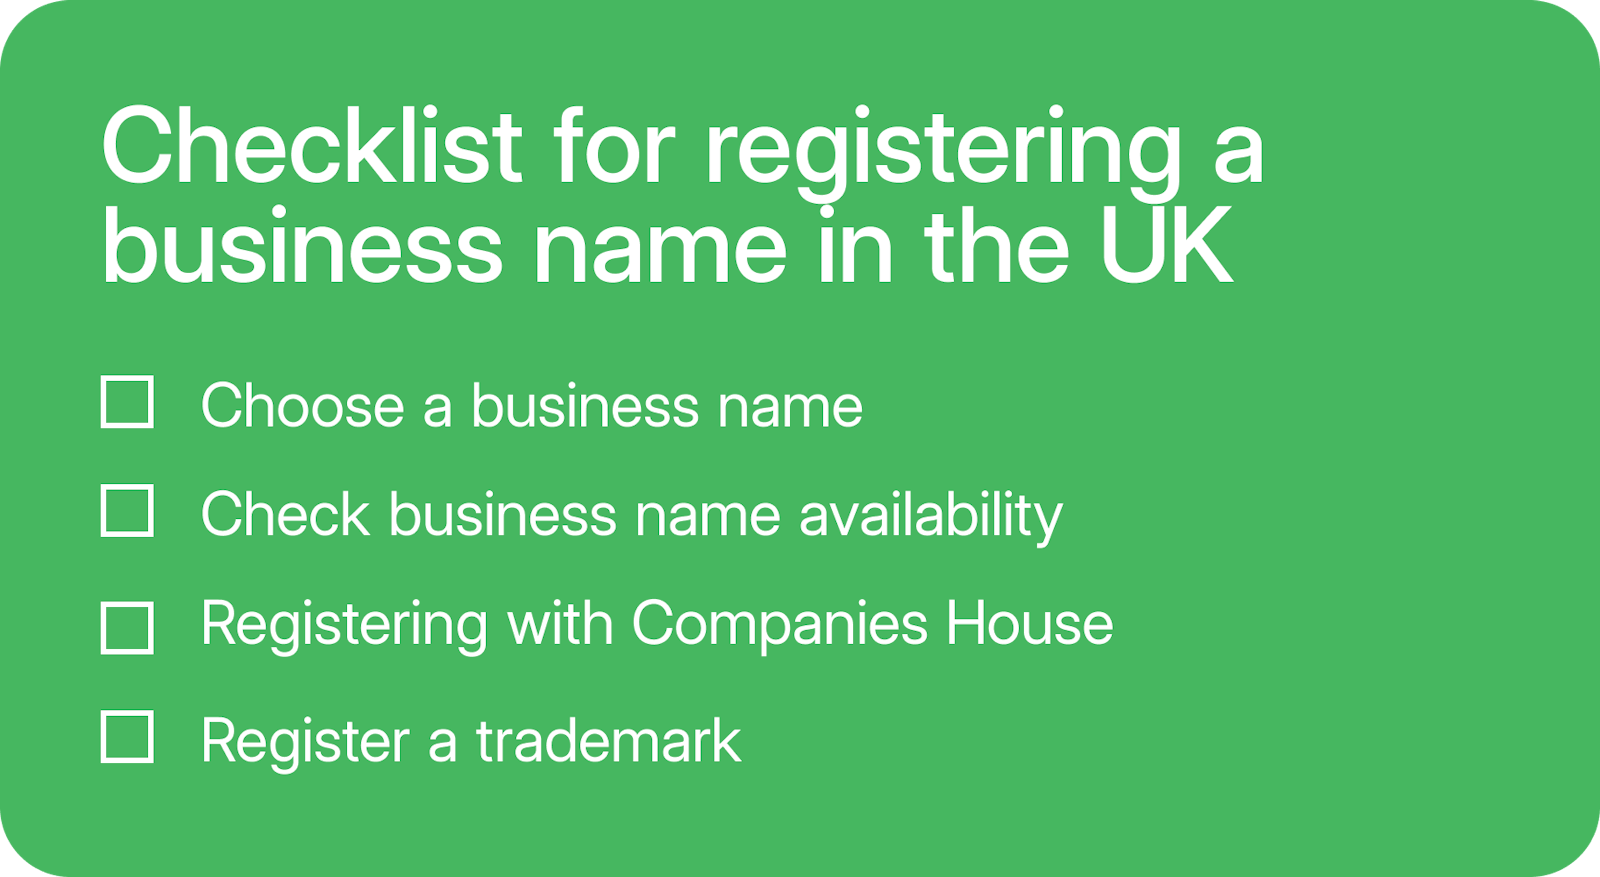 Checklist for registering a business name in the UK